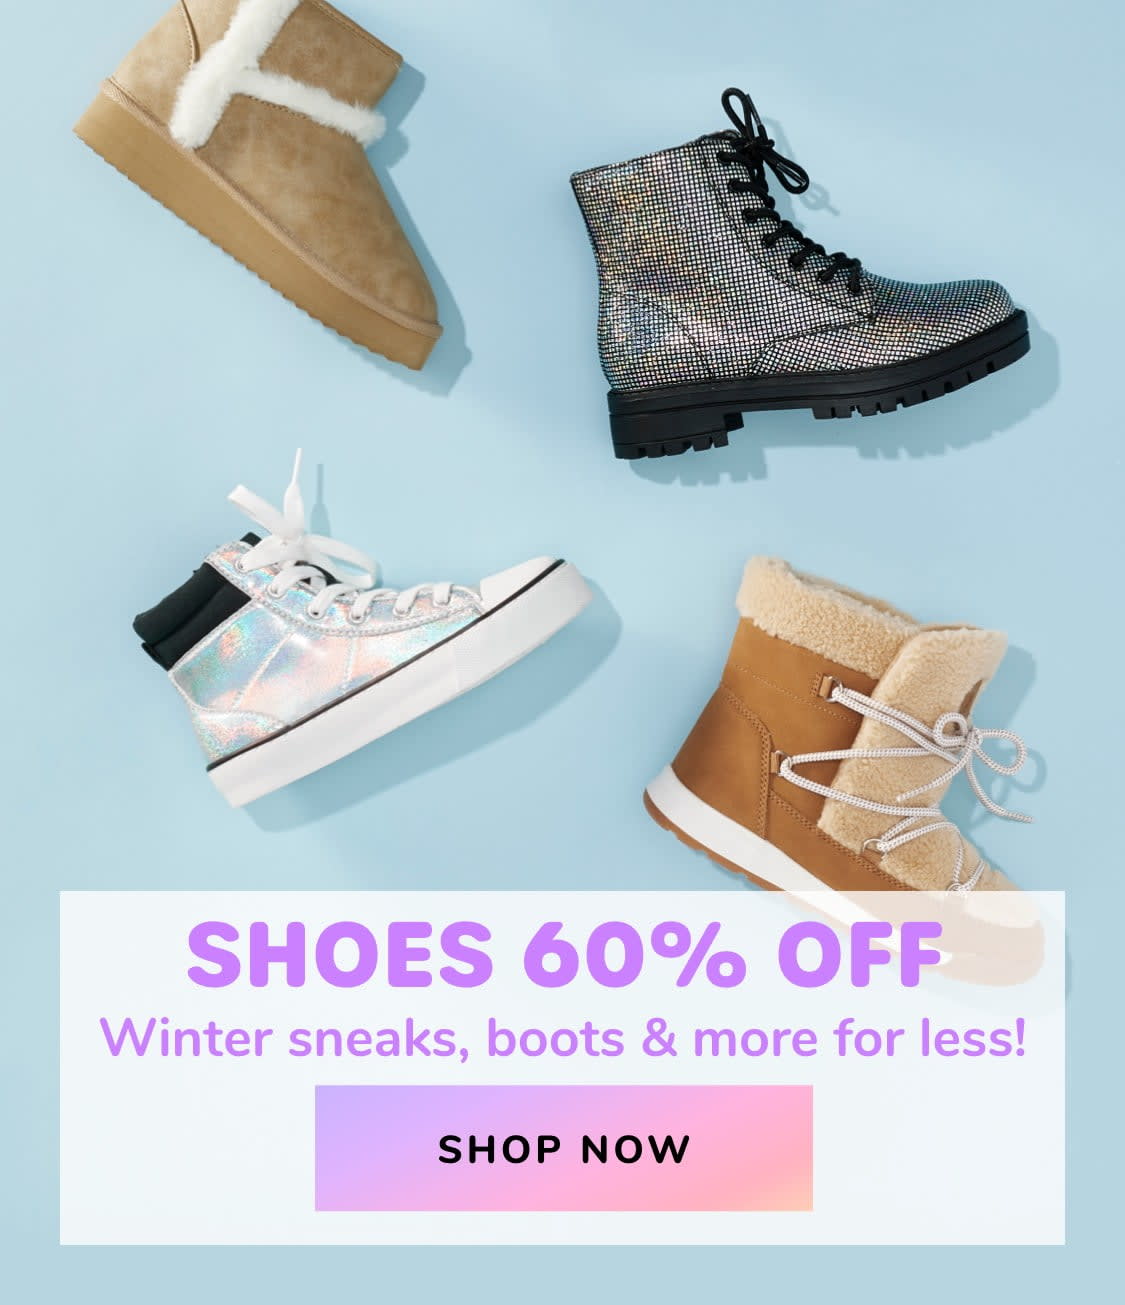 SHOES 60% OFF | Winter sneaks, boots & more for less!